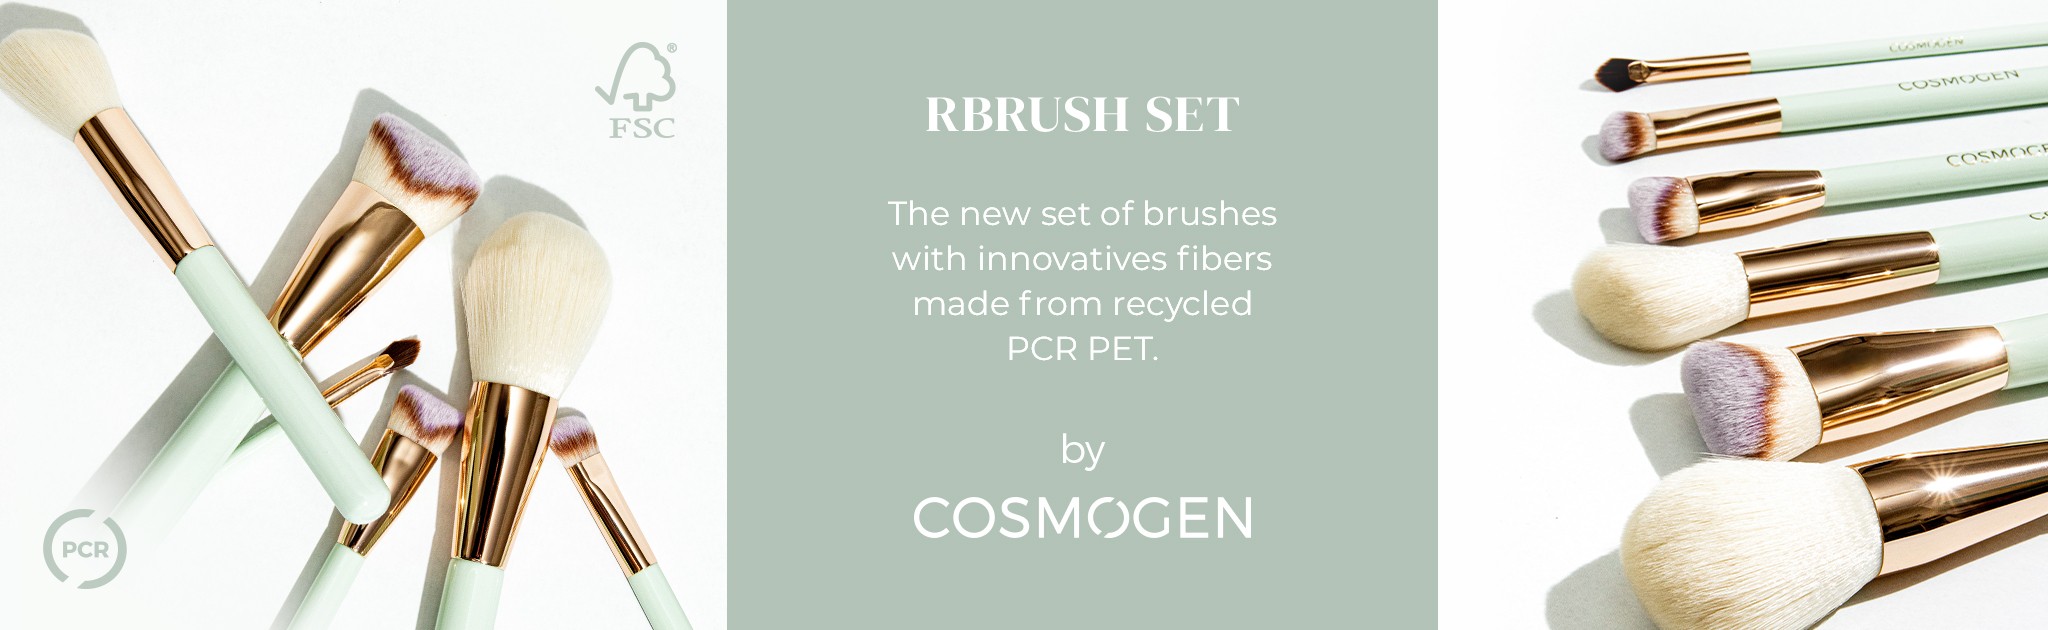 https://www.cosmogen.fr/new-rbrush-set.html?search_query=rbrush&results=1